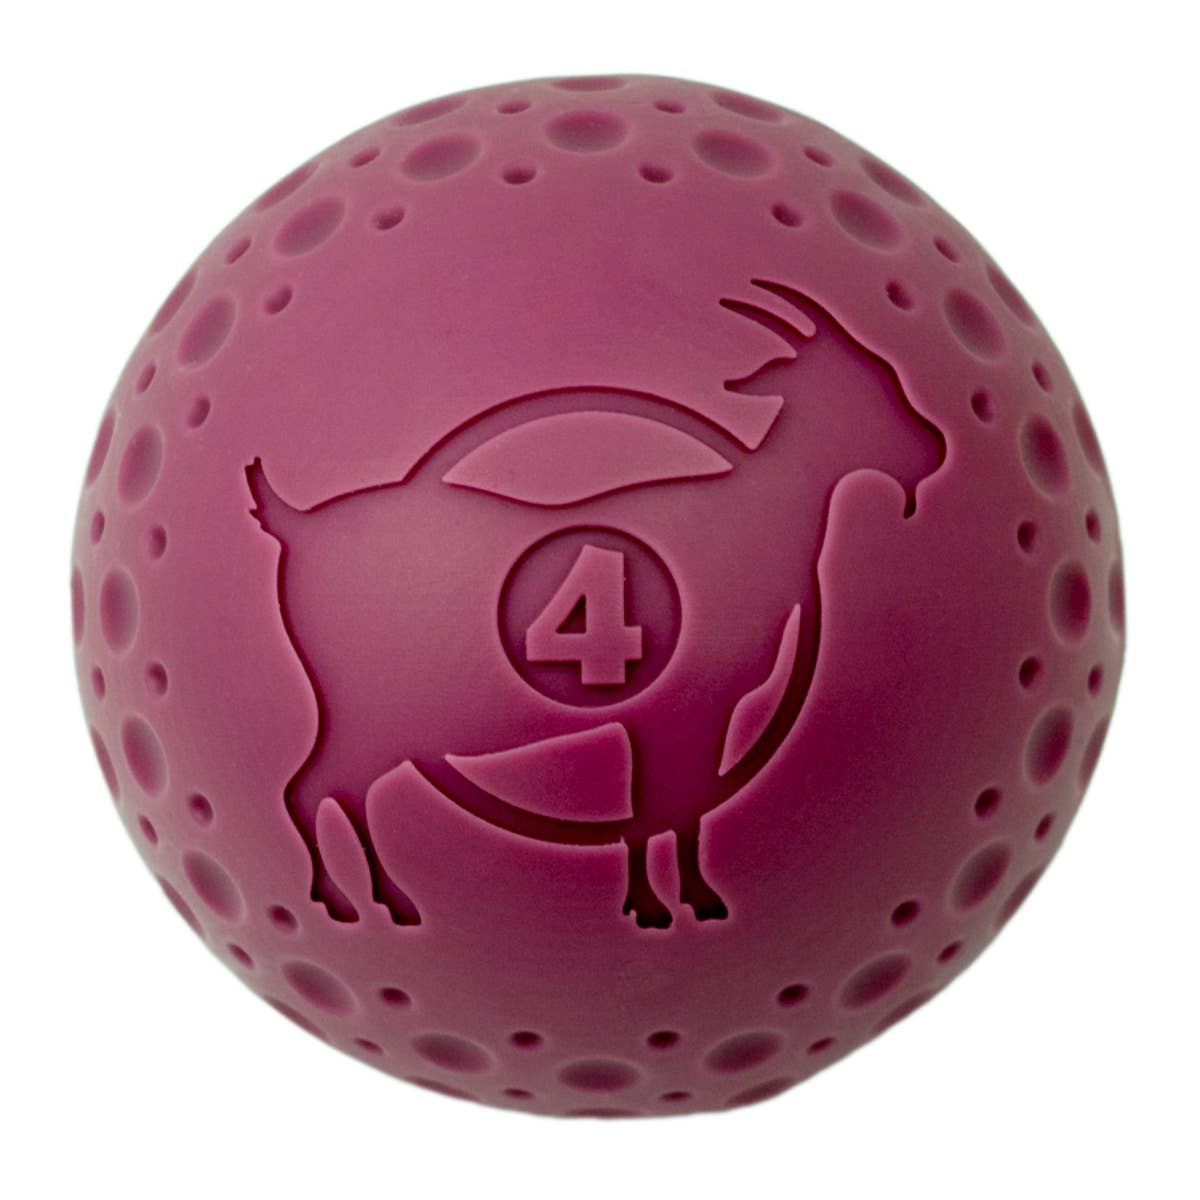 Tall Tails - Large GOAT Sport Ball